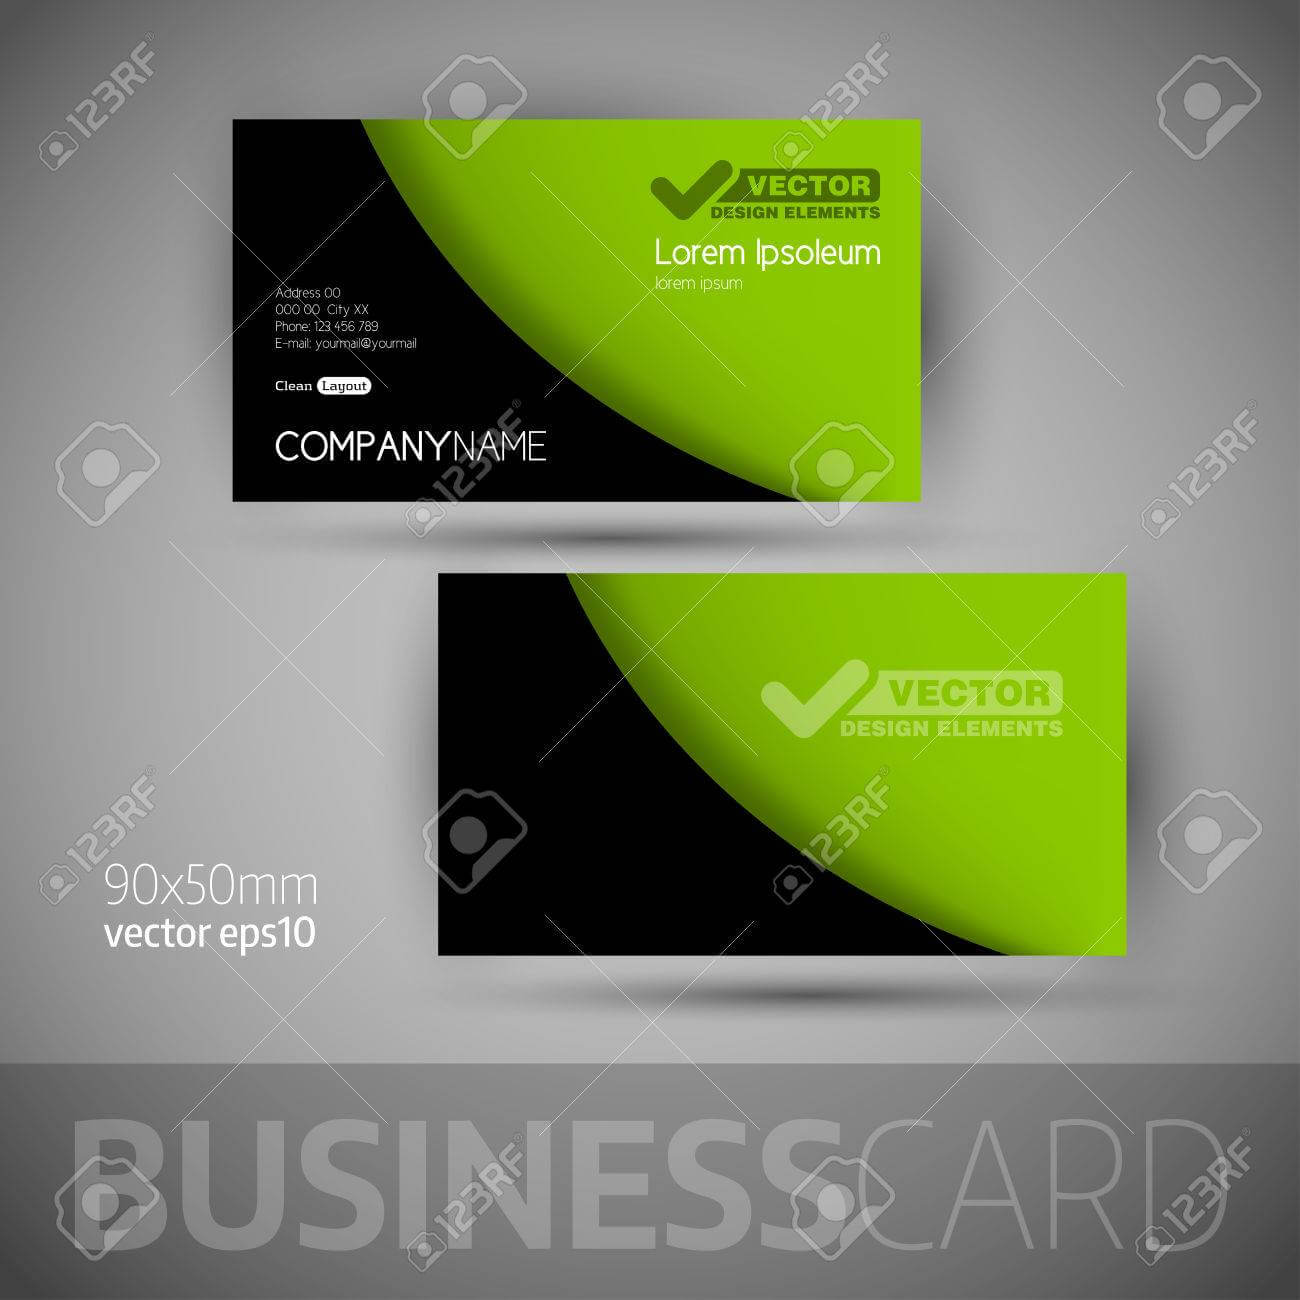 Business Card Template With Sample Texts. Elegant Vector Design.. In Calling Card Free Template